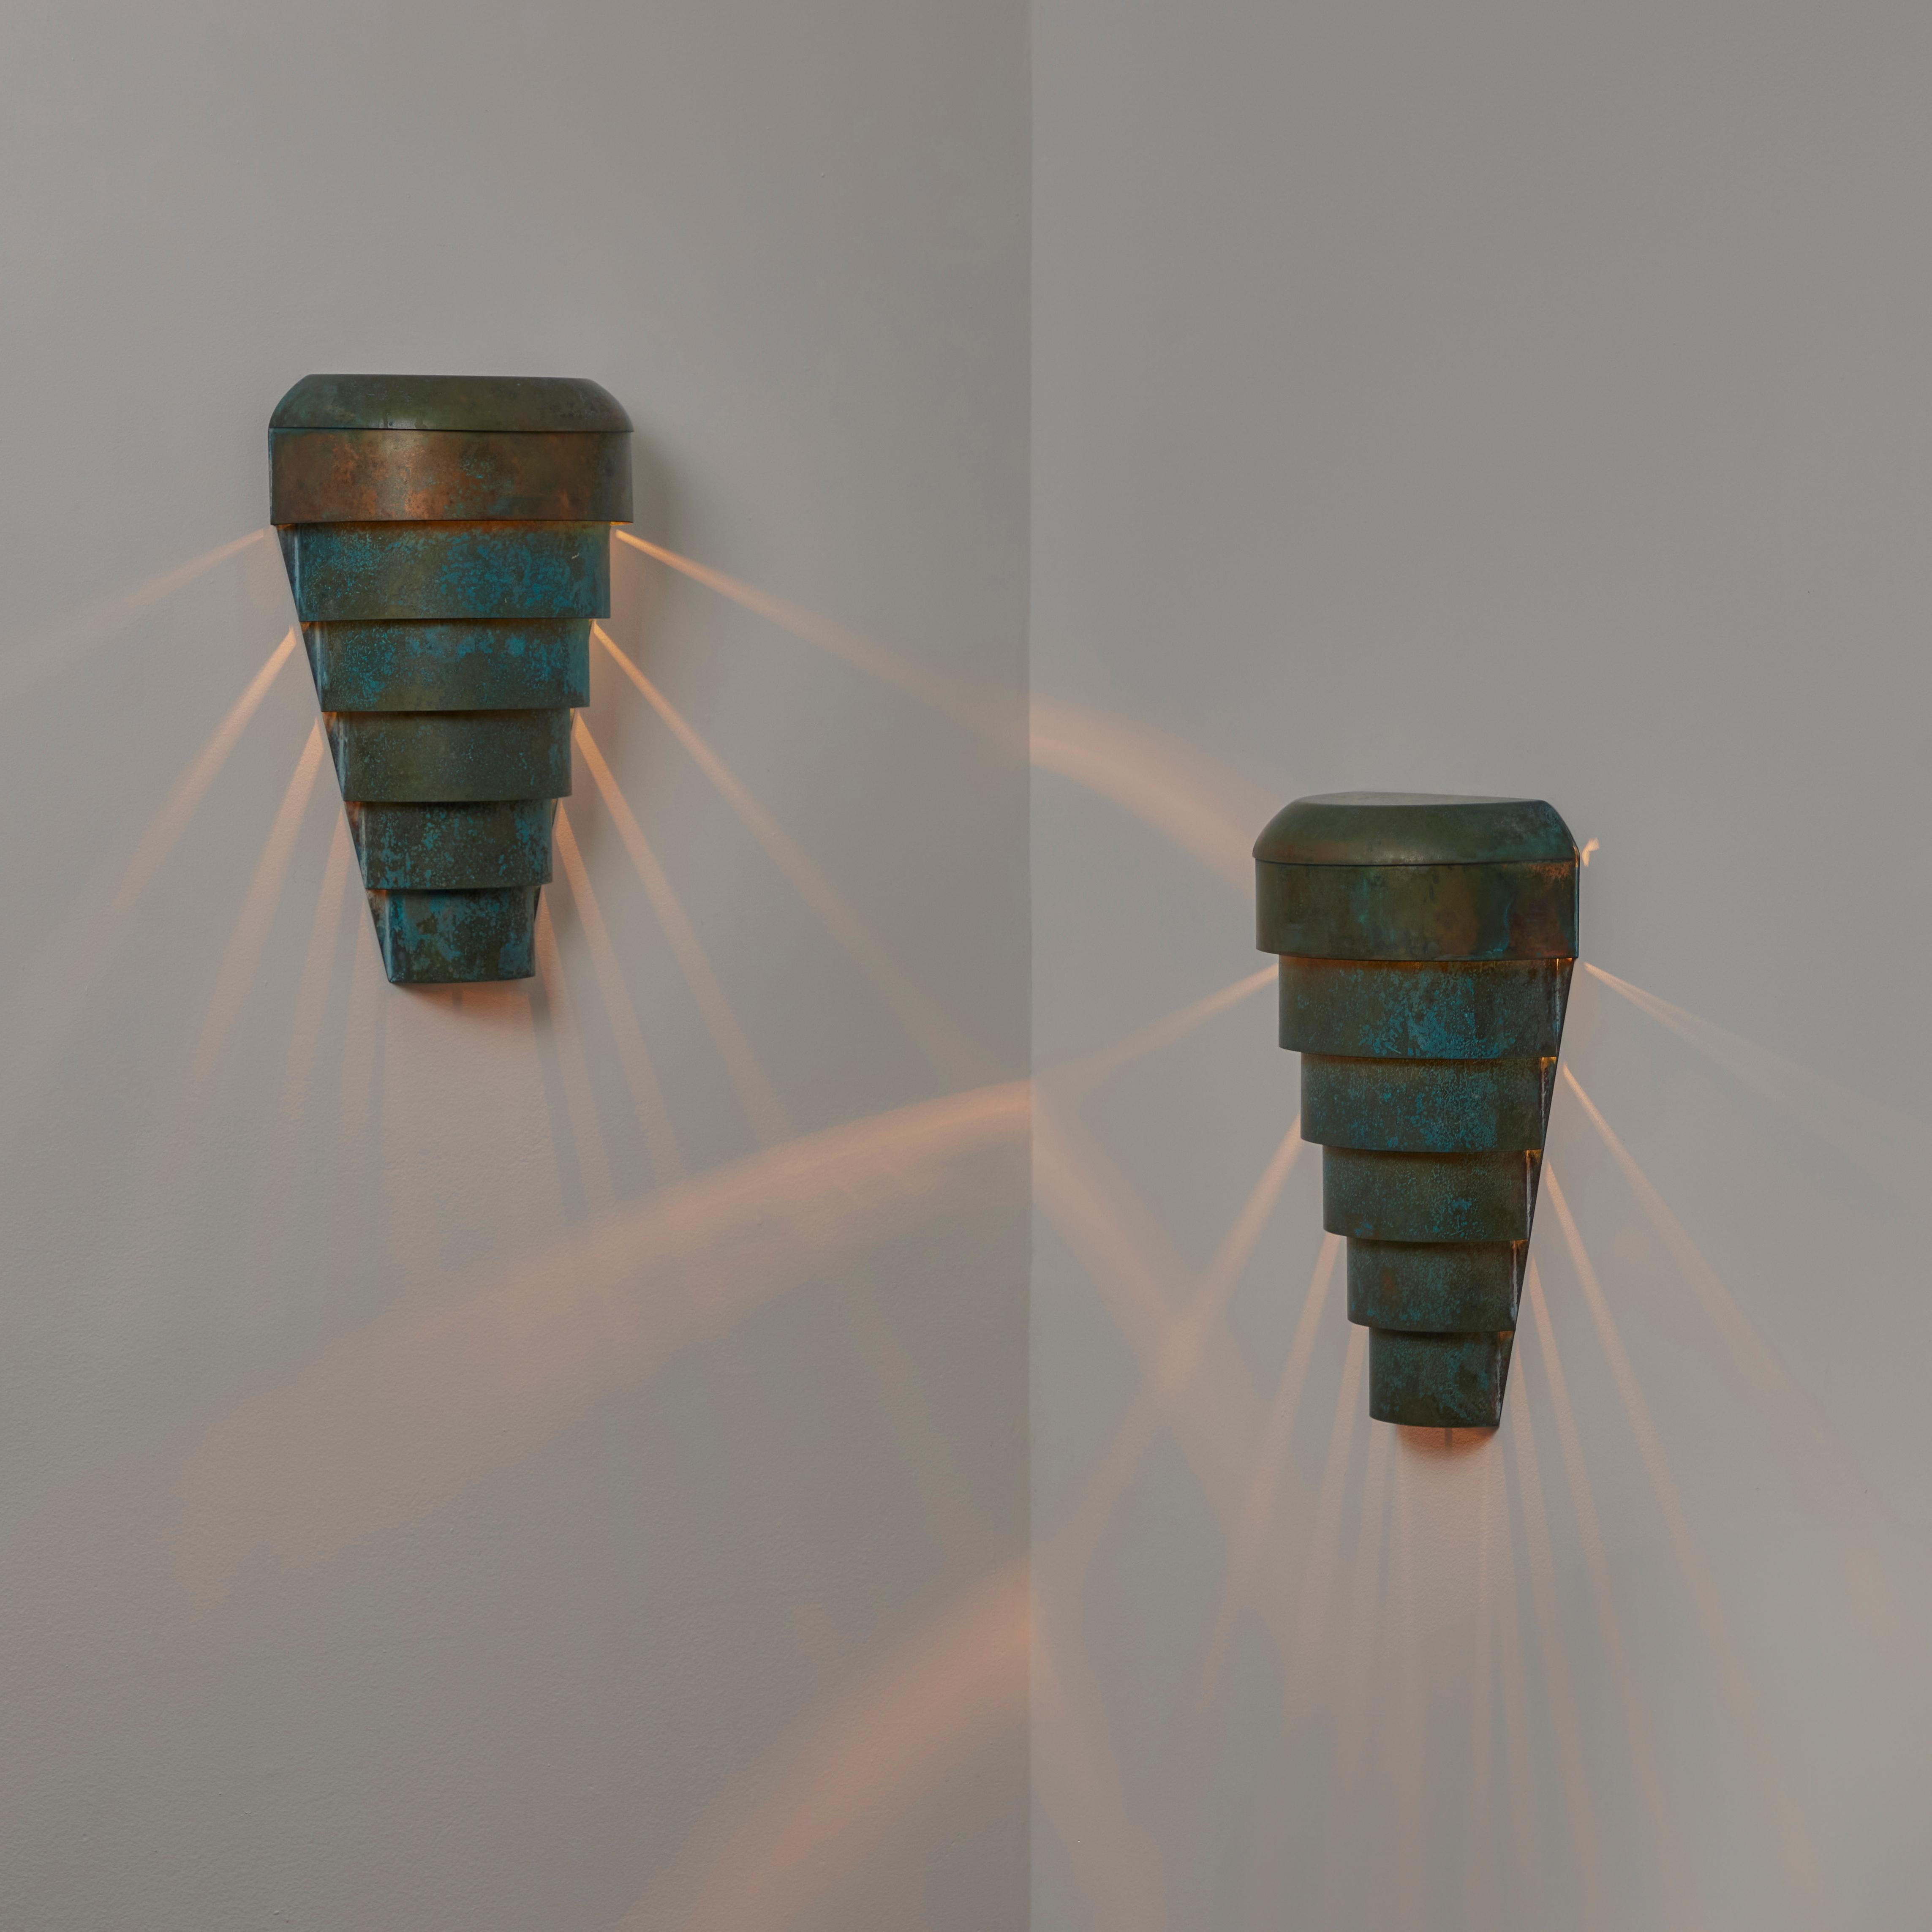 Pair of Danish Wall Lamps. Designed and manufactured in Denmark in the 1940s. Triangular copper design with a tiered step-down pattern. Can be installed facing down or facing up. Verde color finish throughout. Holds a single e27 socket type, adapted